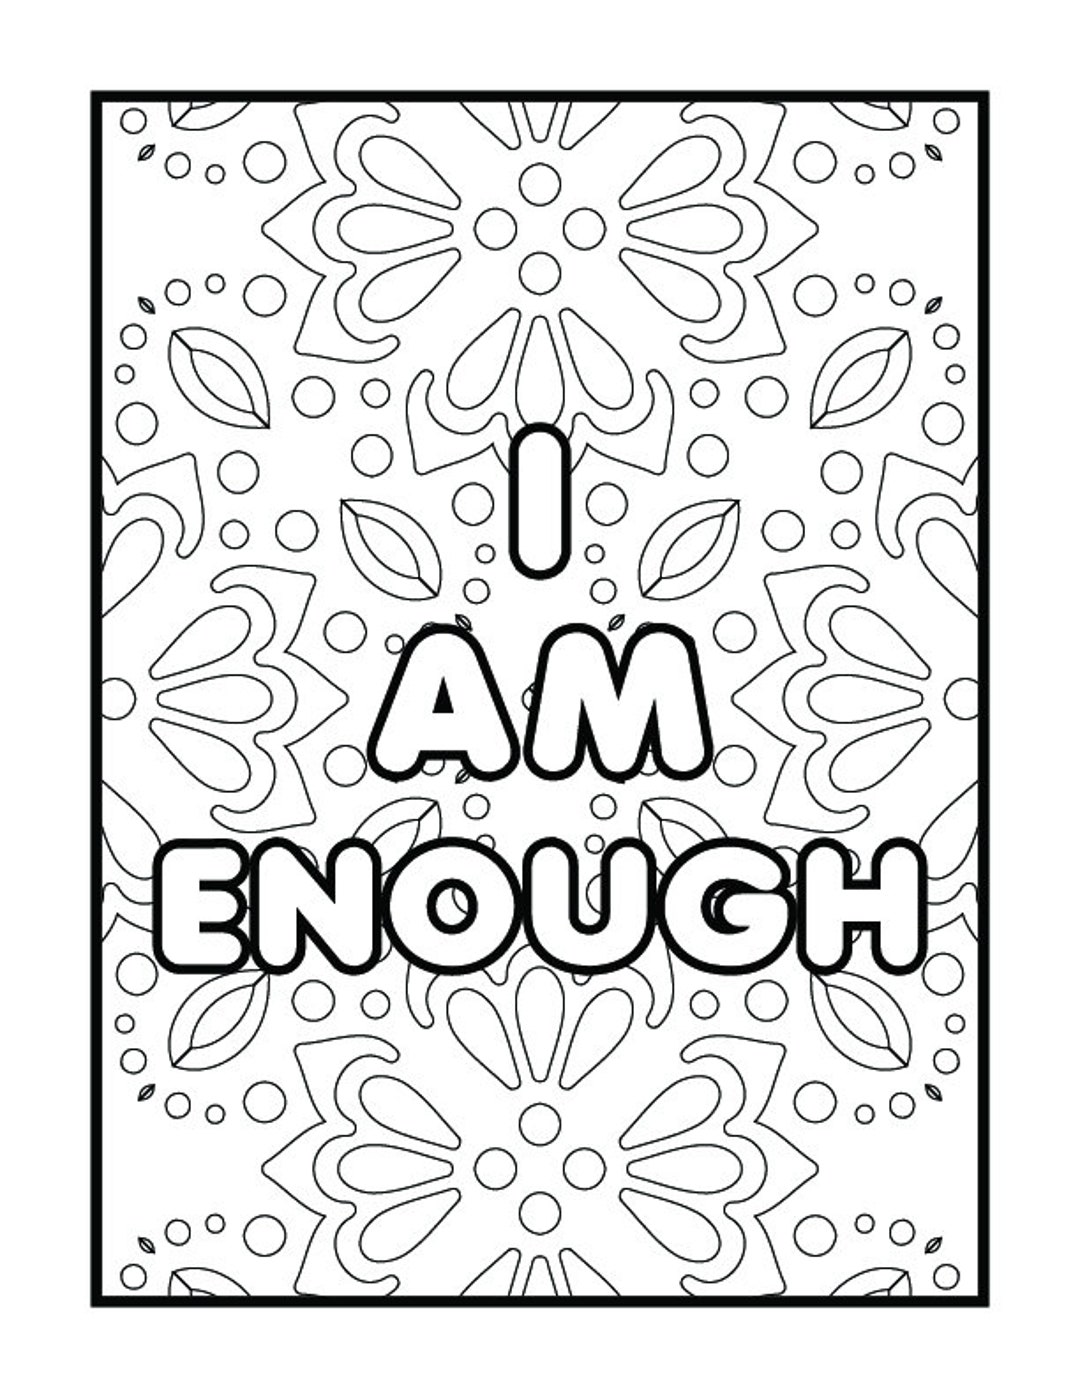 Inspirational Coloring Book for Girls: Motivation Quotes Design Cute,  Relaxing, Inspiring, Coloring Books for Ages 2-4, 4-8, 9-12, Teen & Adults  (Paperback)